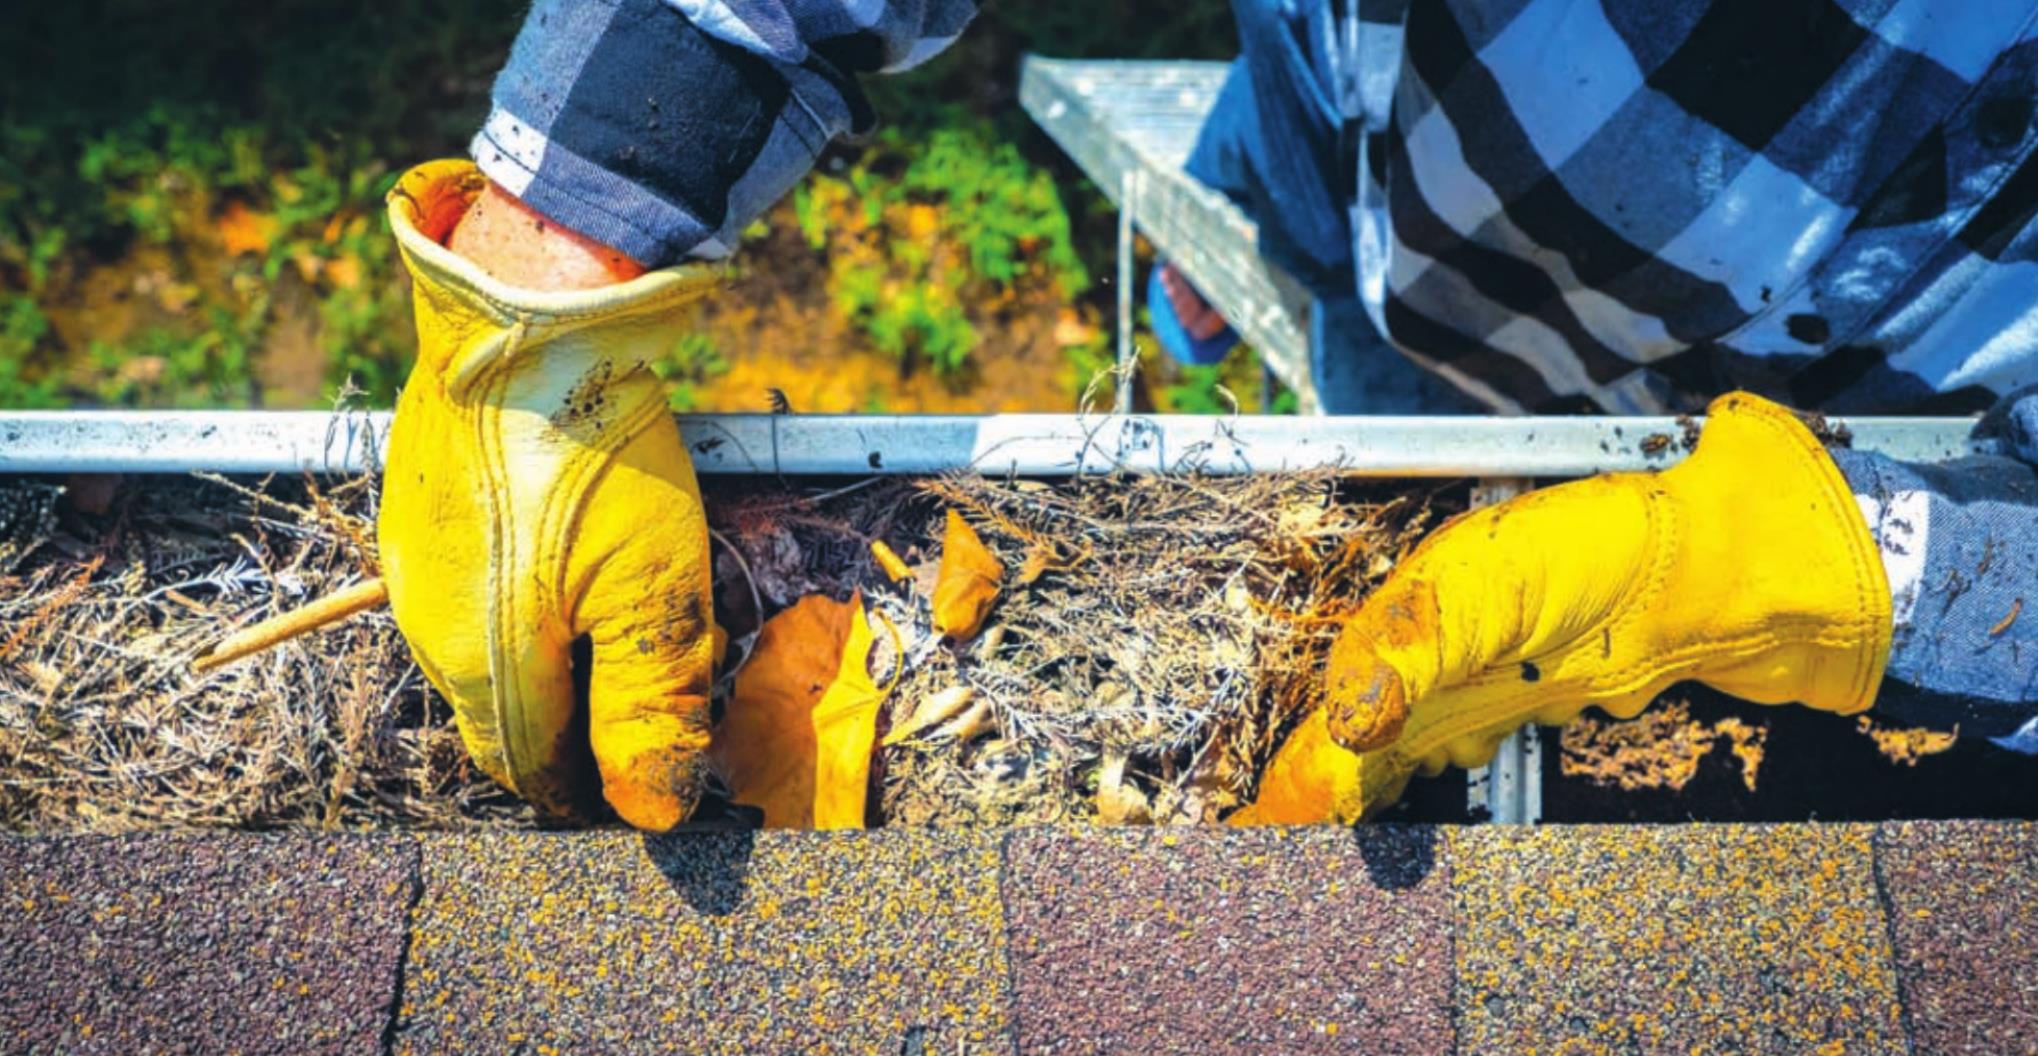 With weather out of the three-digit range, it’s the perfect time to get fall home maintenance done. Clean out the gutters, check the chimney for debris and make sure roof shingles are in good shape. Provided